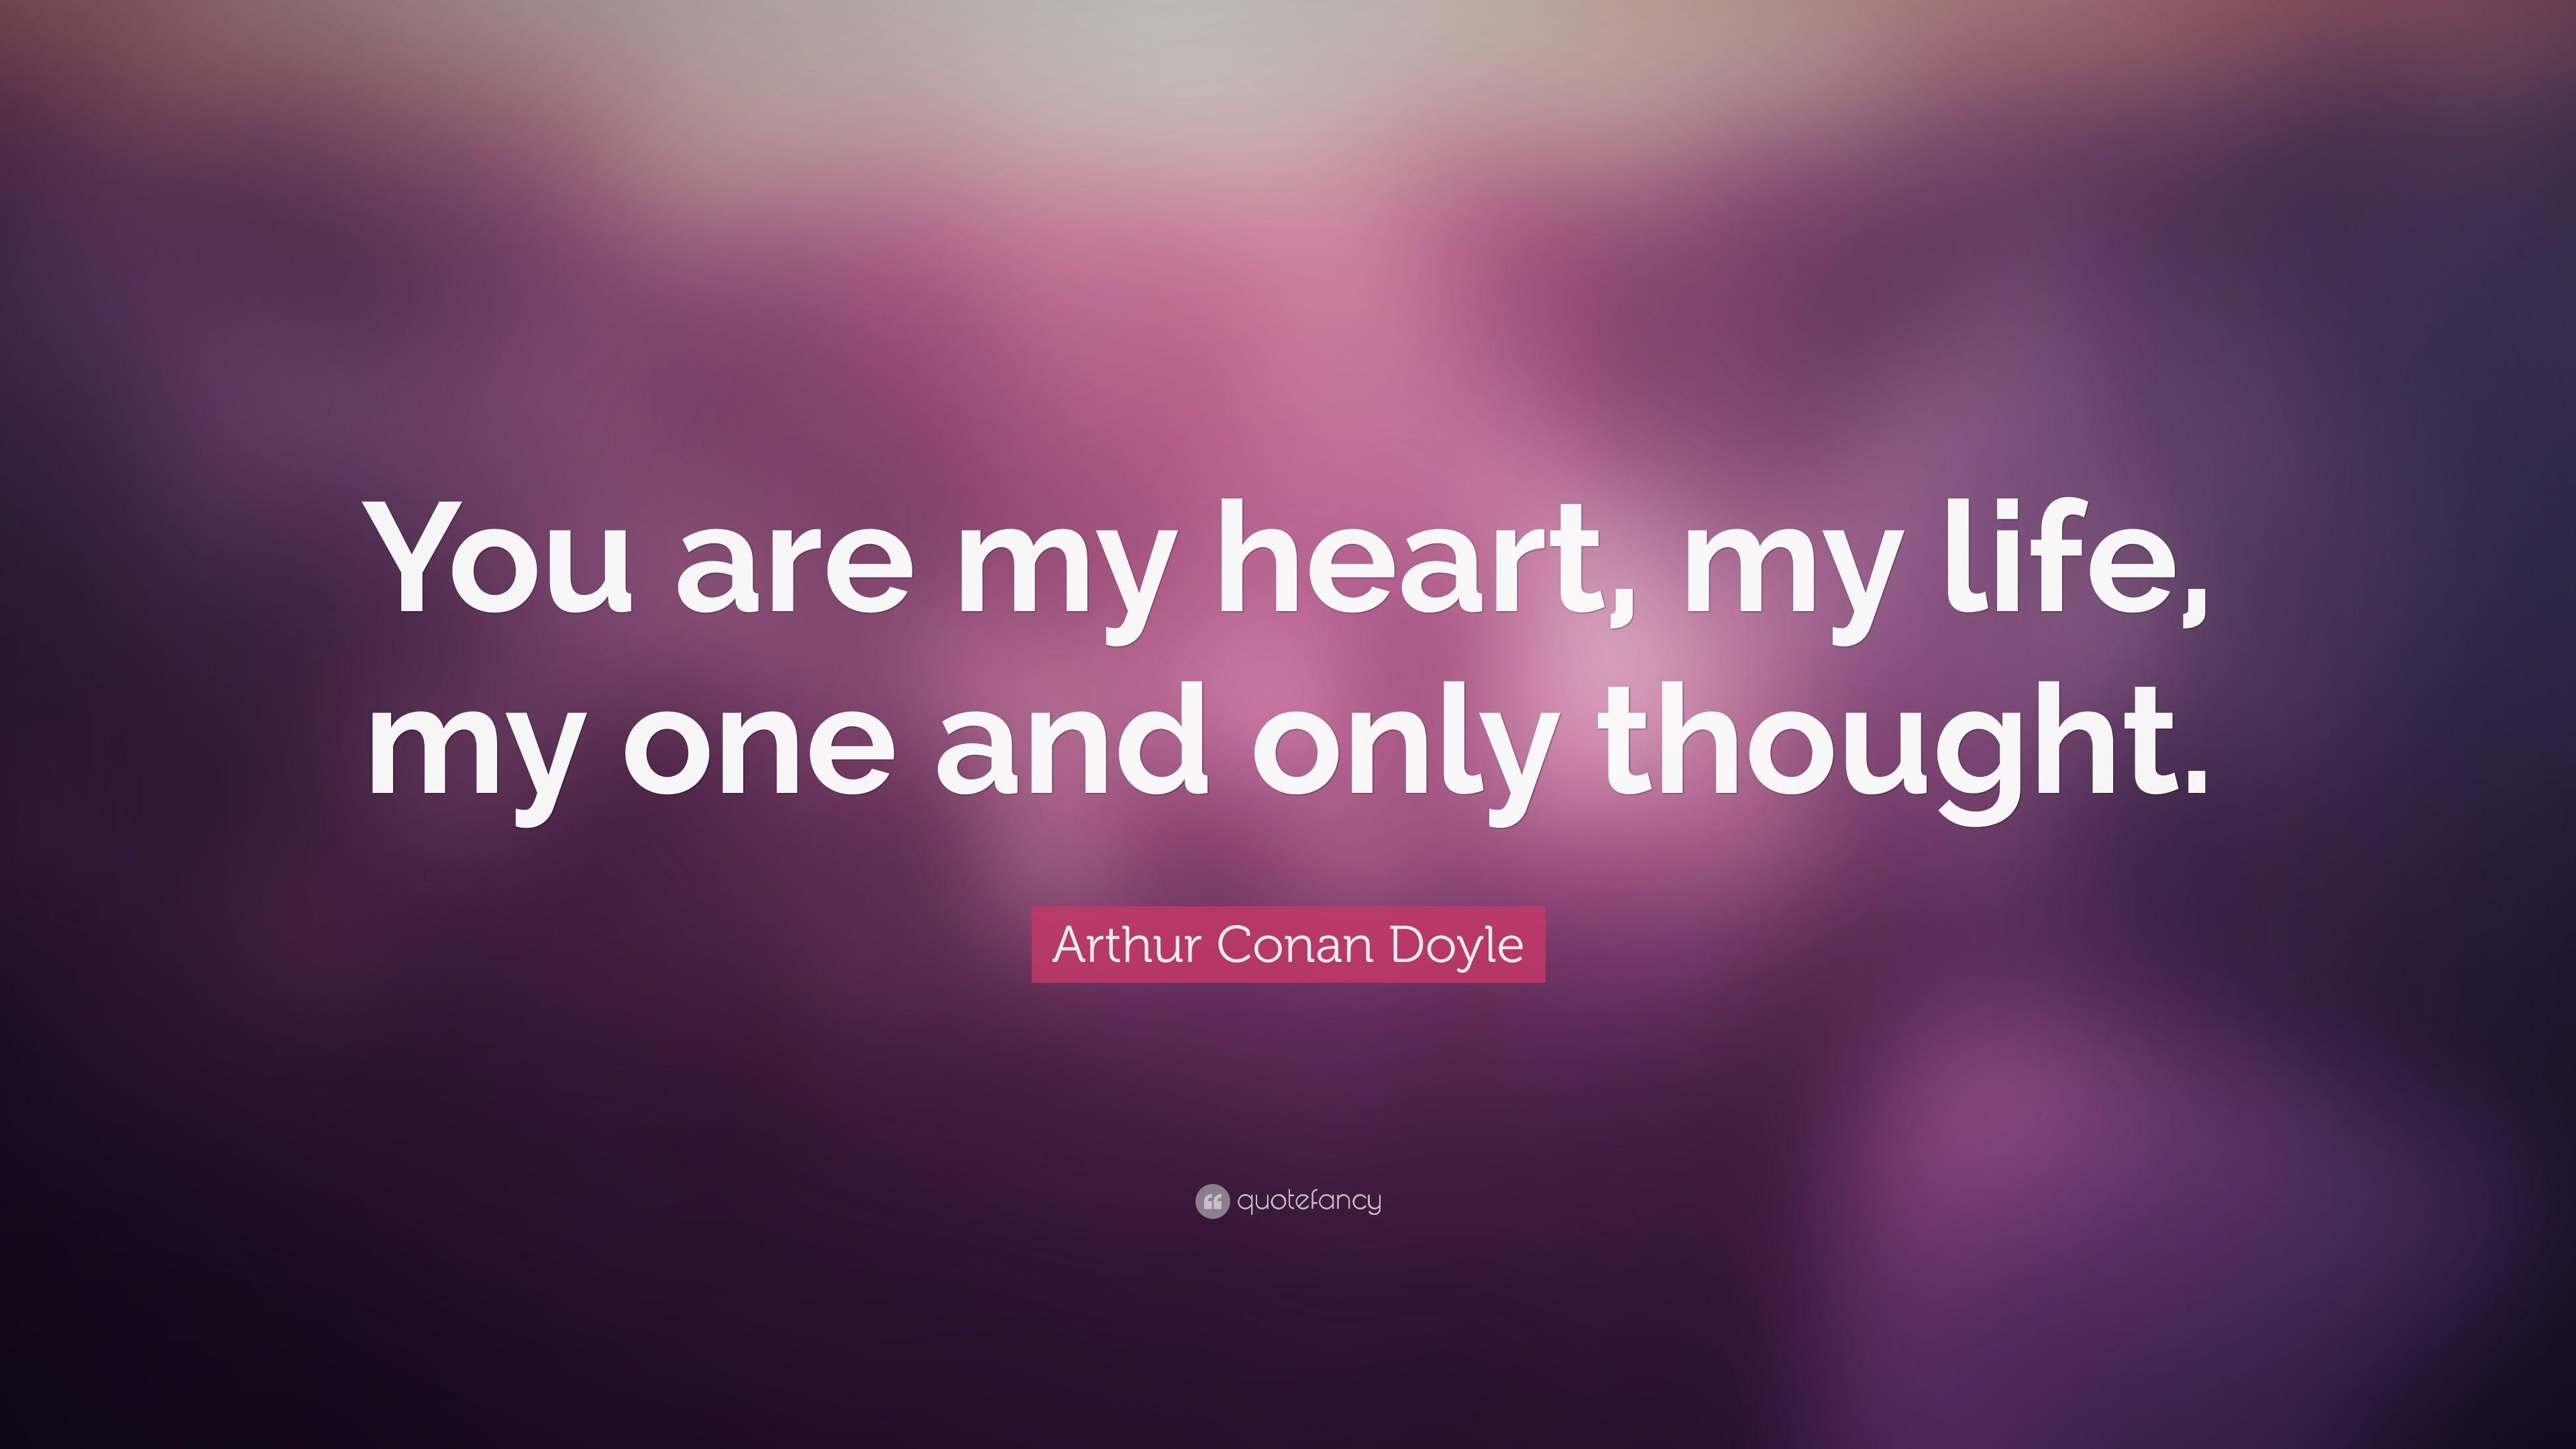 Arthur Conan Doyle Quote: “You are my heart, my life, my one